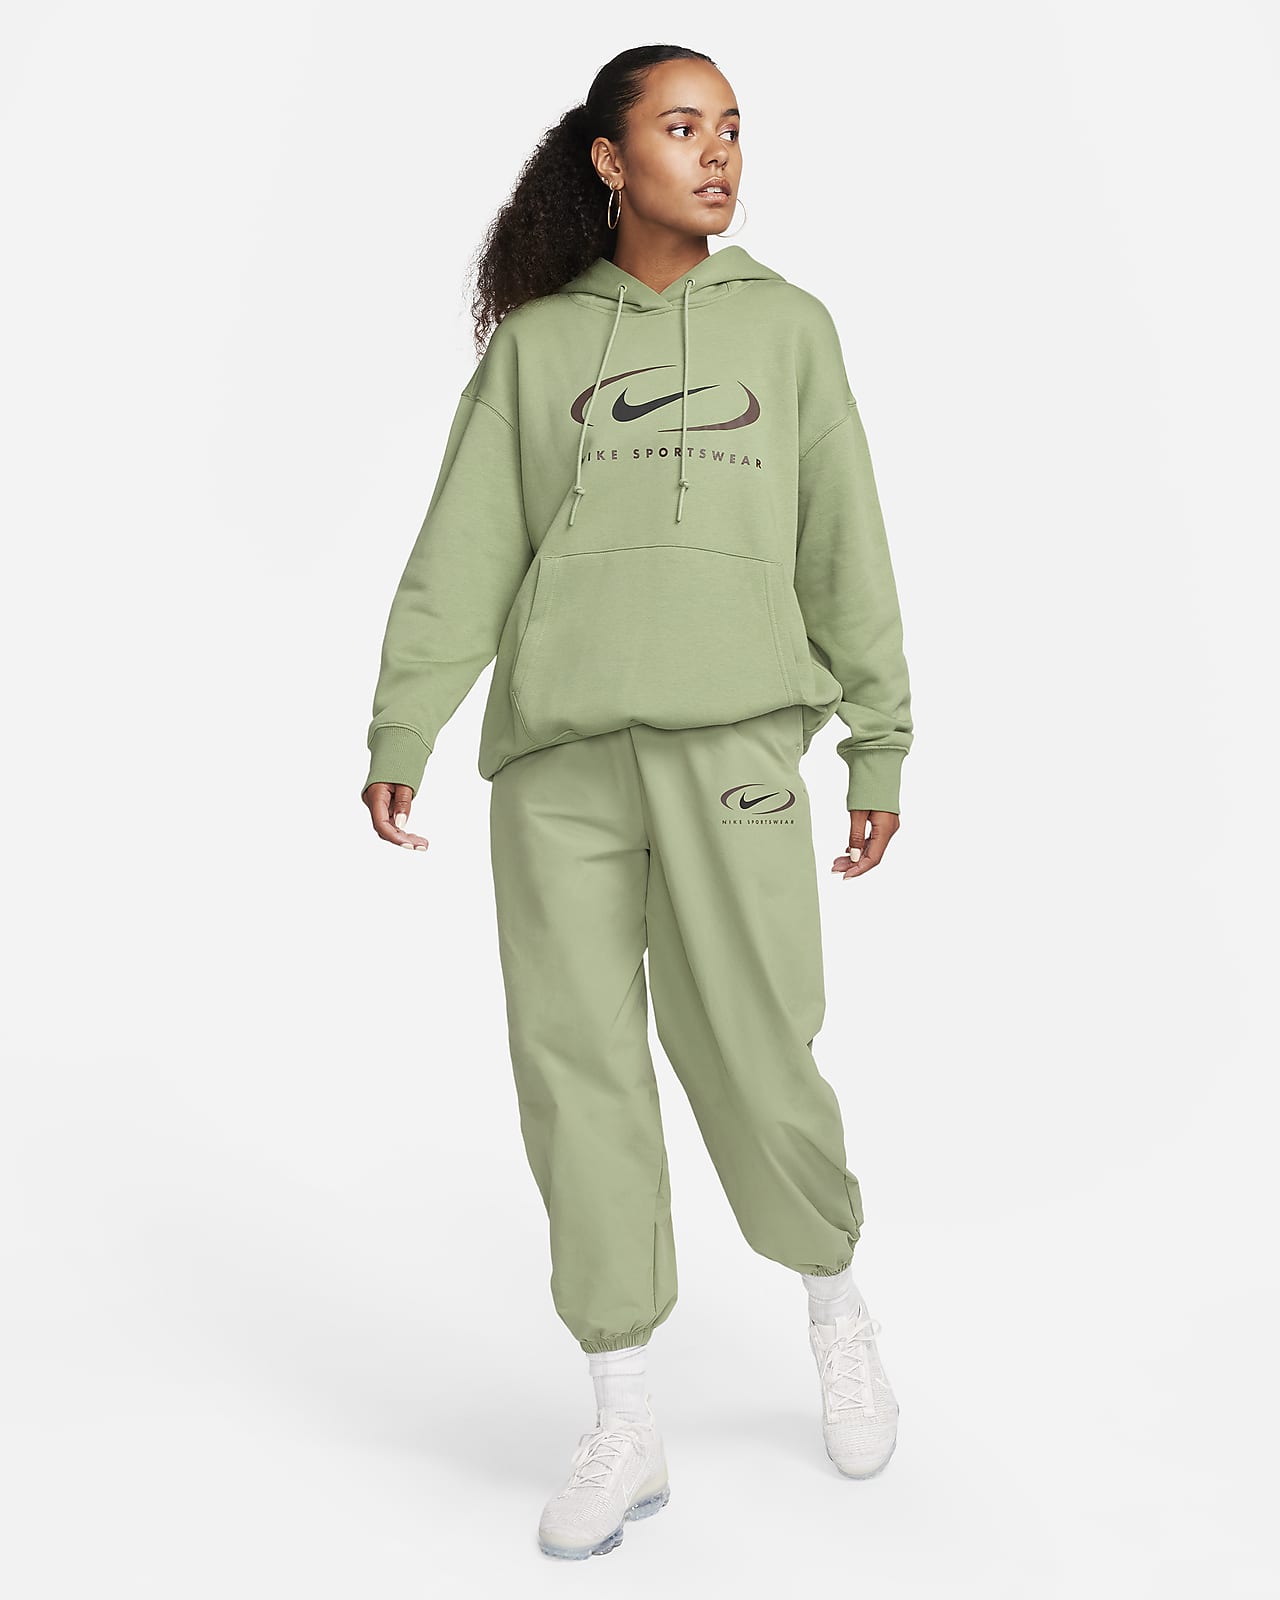 https://static.nike.com/a/images/t_PDP_1280_v1/f_auto,q_auto:eco/dc1f57f4-3d47-4e11-9fff-d7e3d2ec0c18/sportswear-woven-joggers-cGNdpD.png